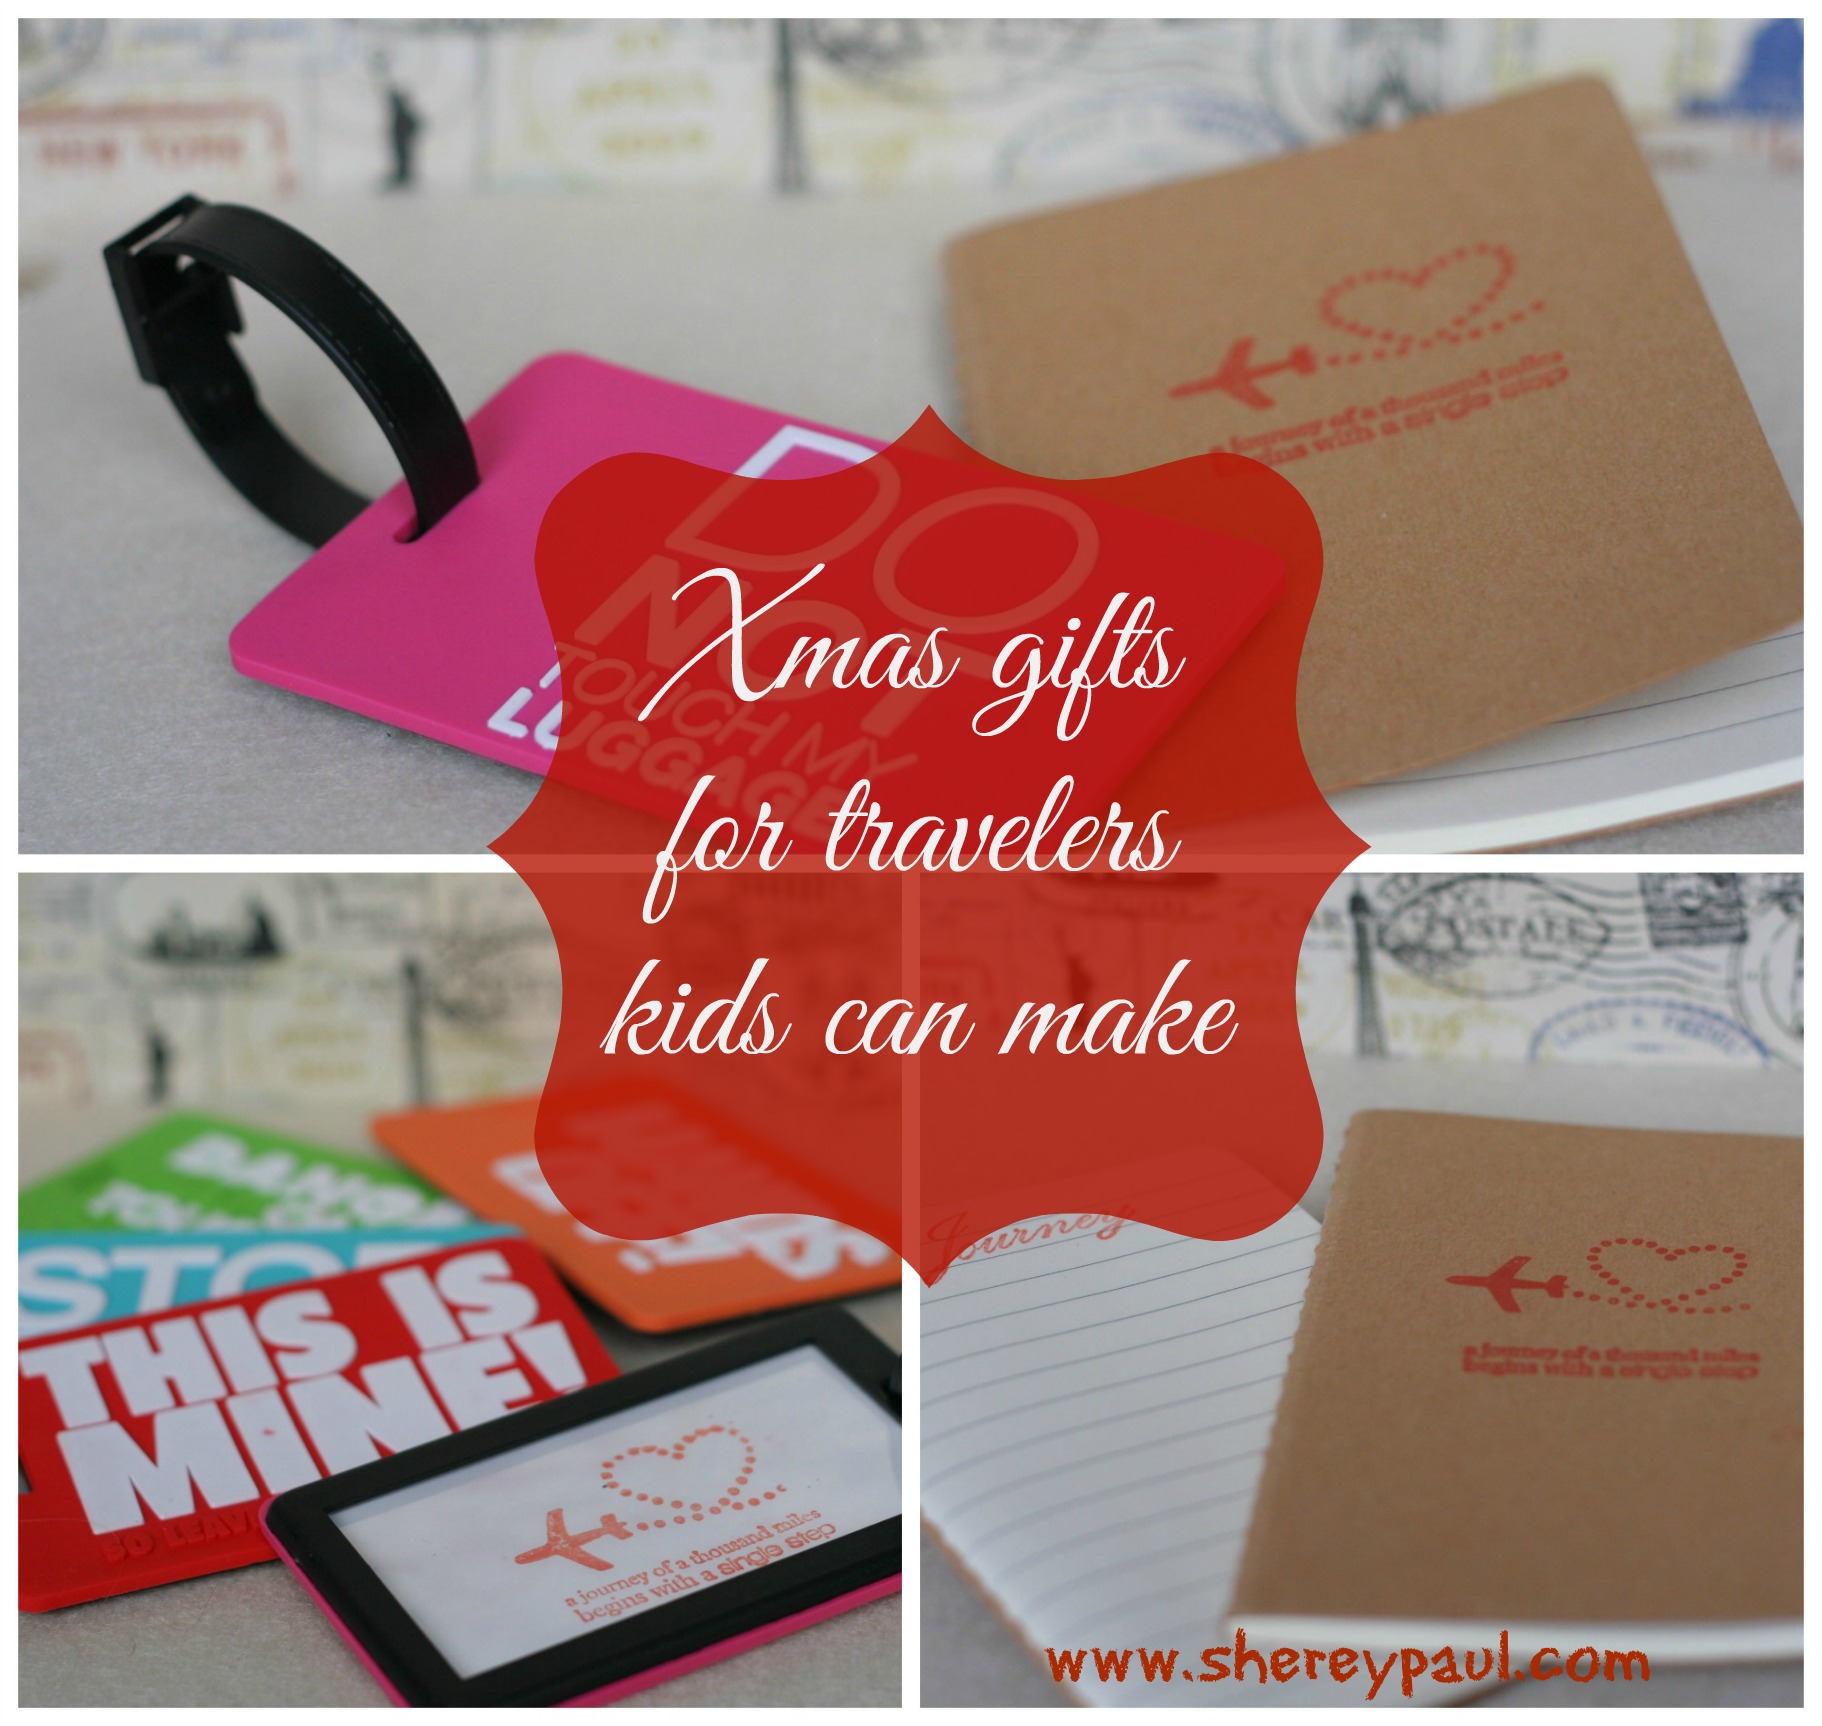 Xmas gifts for travellers kids can make